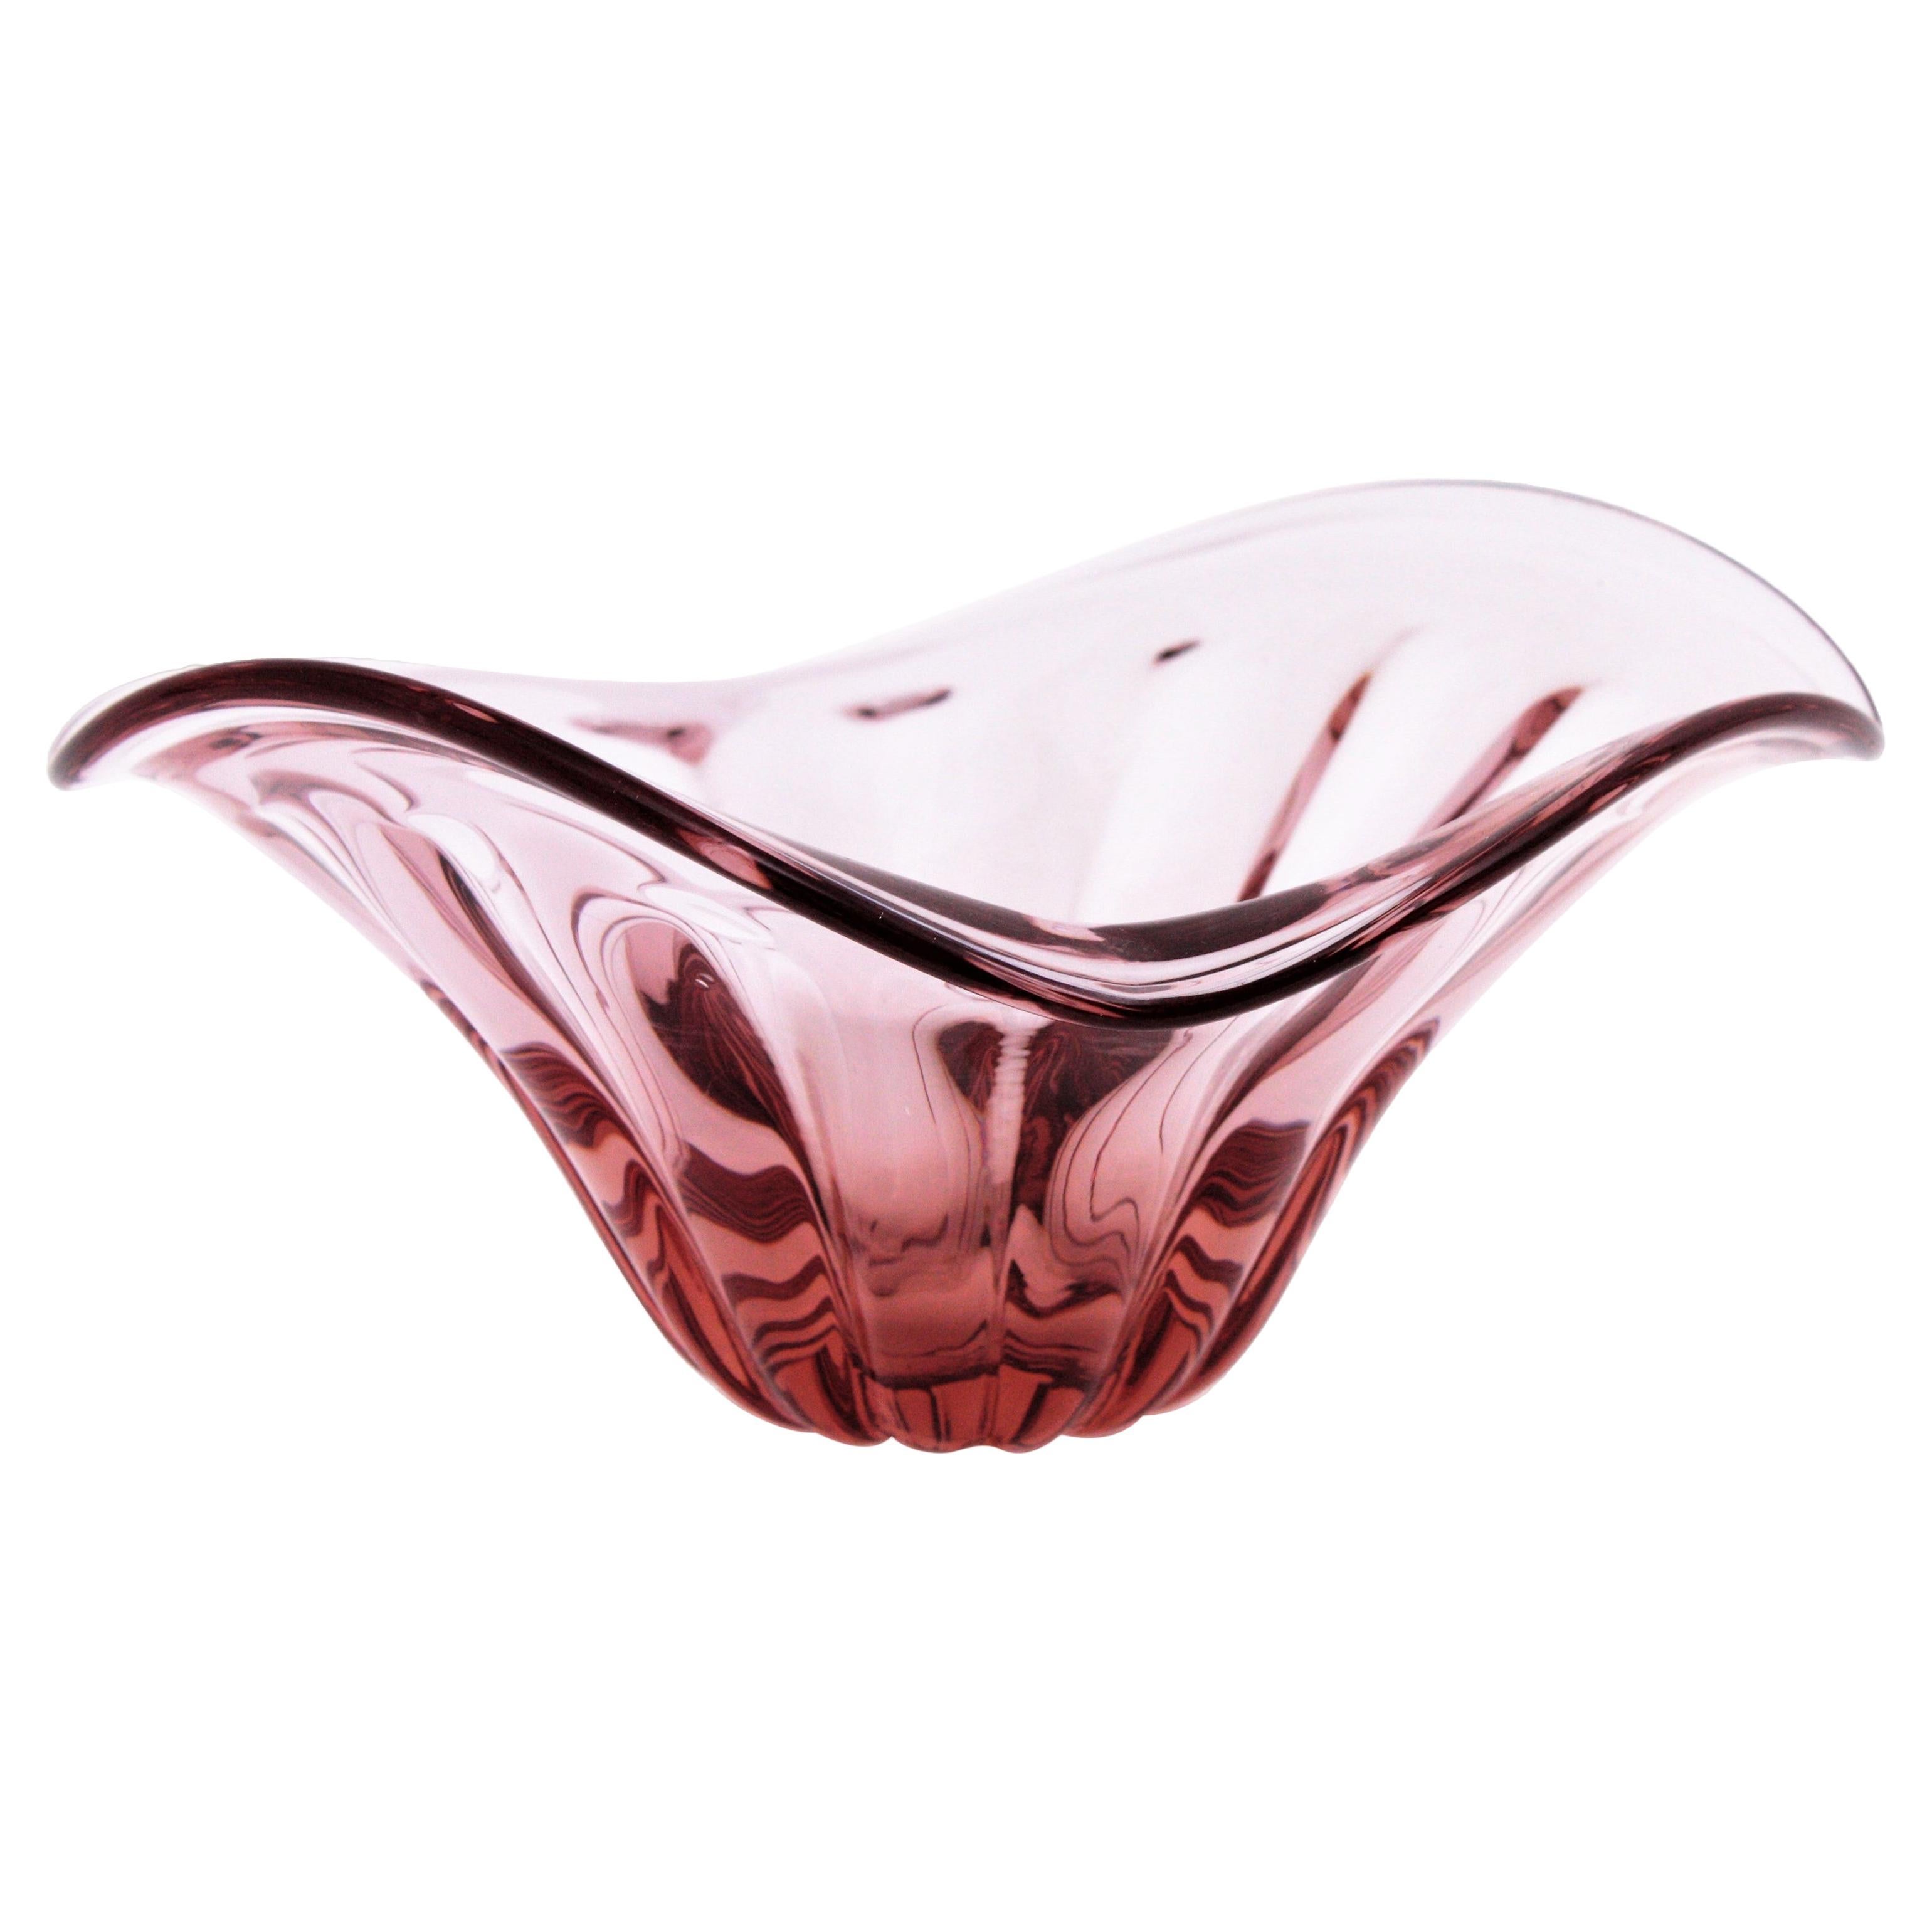 Alfredo Barbini Murano Pink Sommerso Ribbed Glass Centerpiece Bowl, années 1950